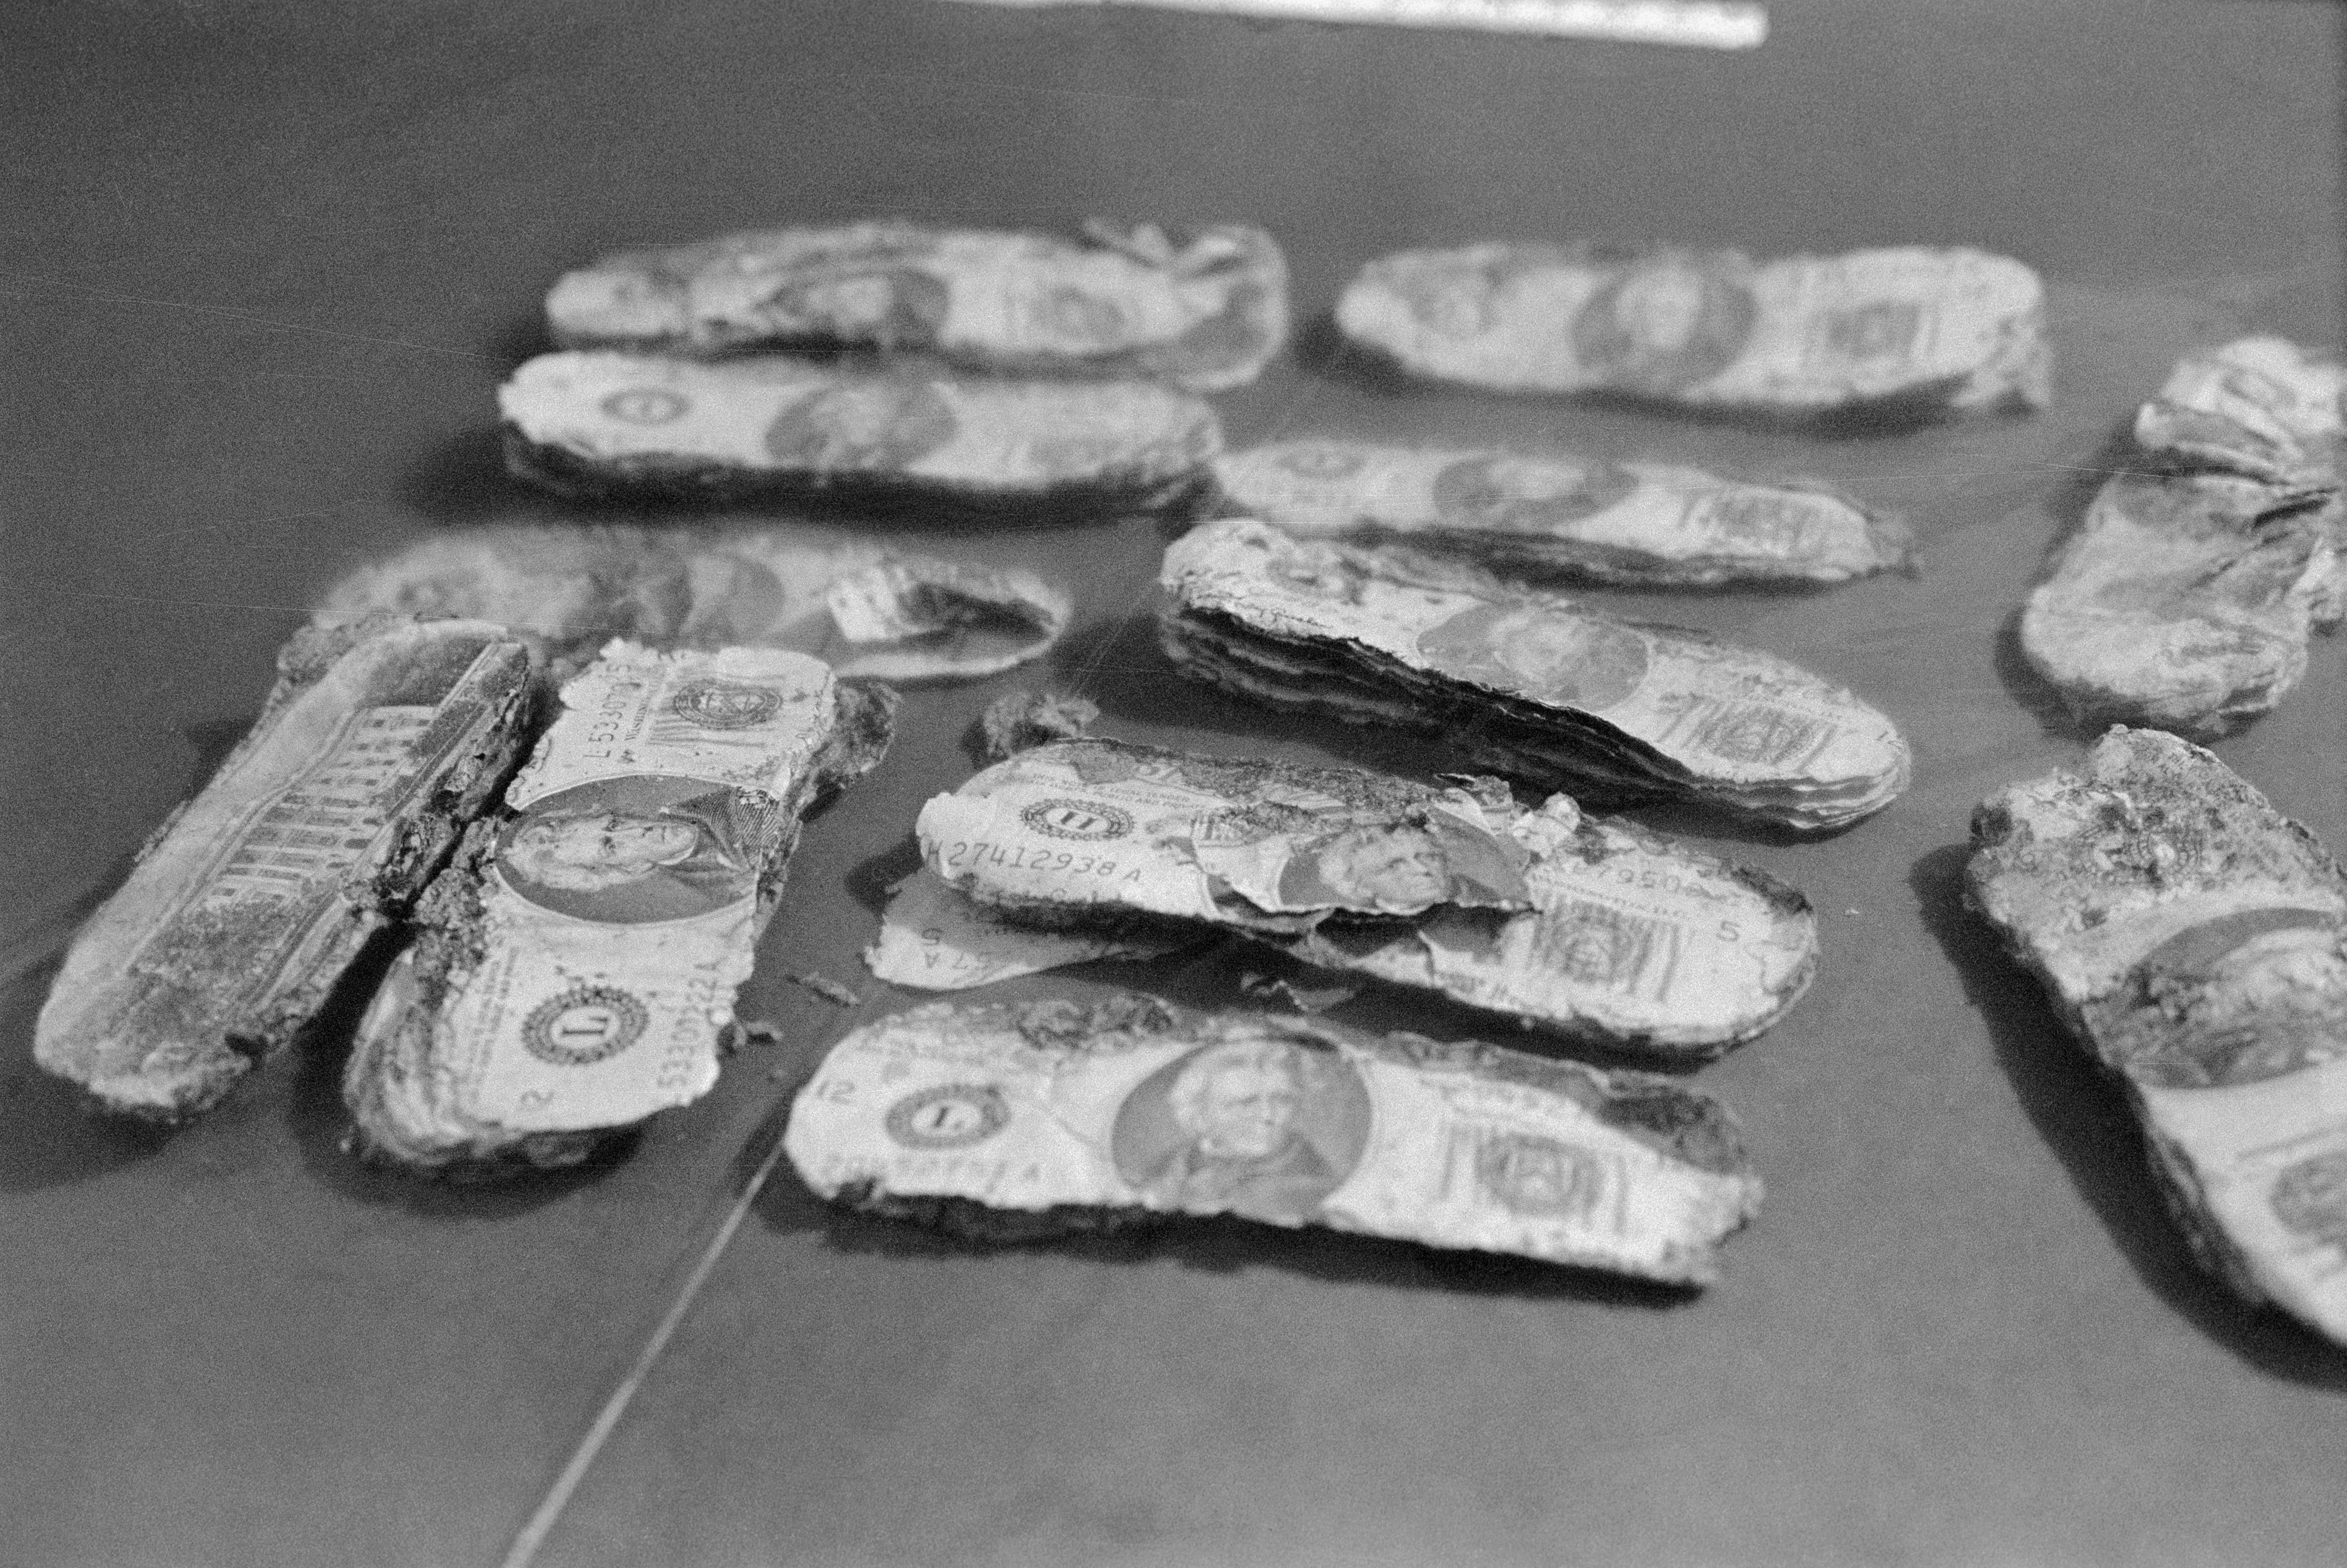 Almost $6,000 of Cooper's money was found along the Columbia River river in 1980 - but the lead led nowhere